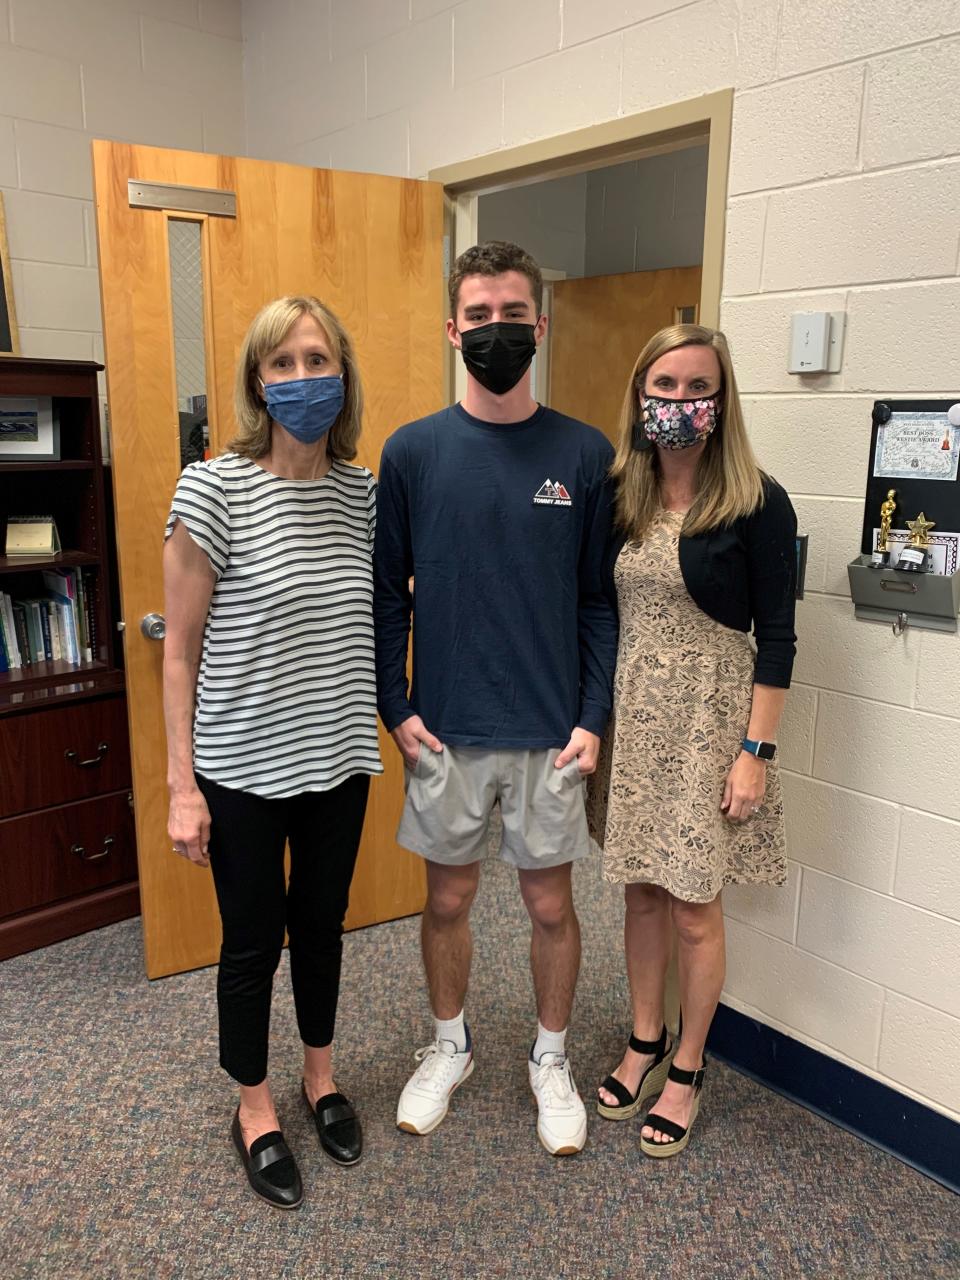 Josh Stevens is congratulated by college and career counselor Sarah Bast, left, and principal Dr. Ashley Speas for being named valedictorian at West High this year.